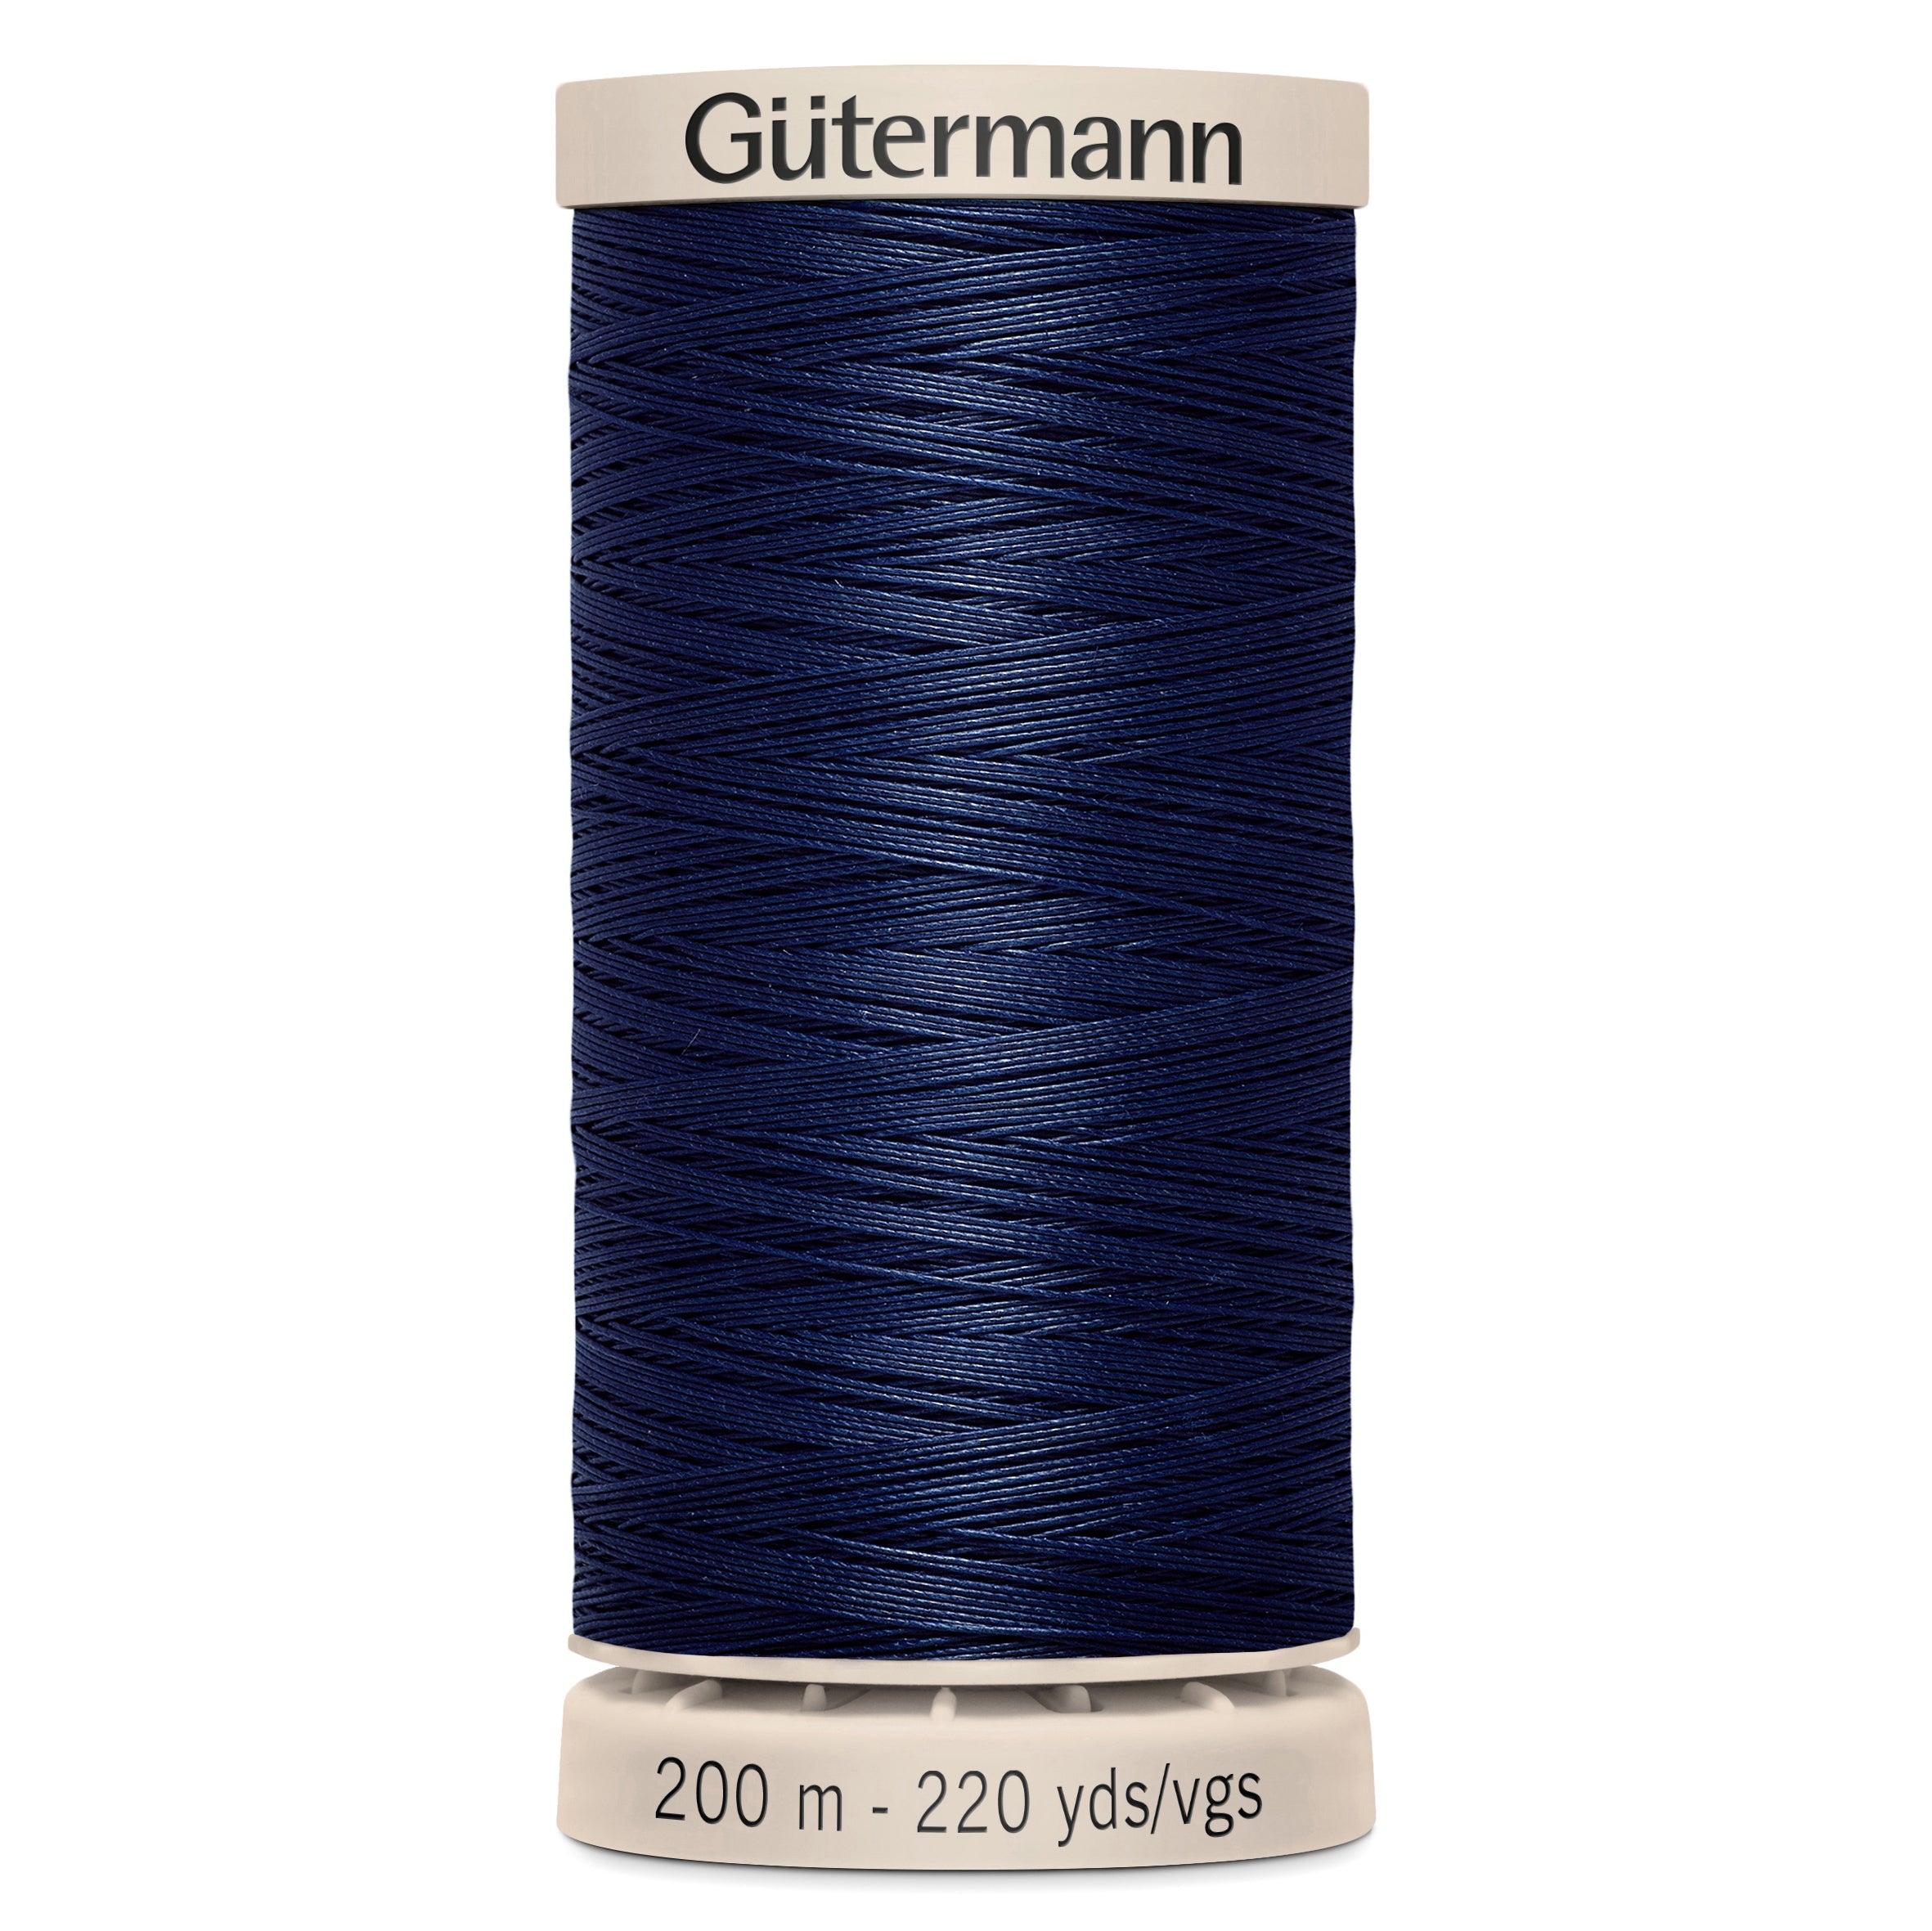 Gutermann Hand Quilting Cotton - 5322 from Jaycotts Sewing Supplies